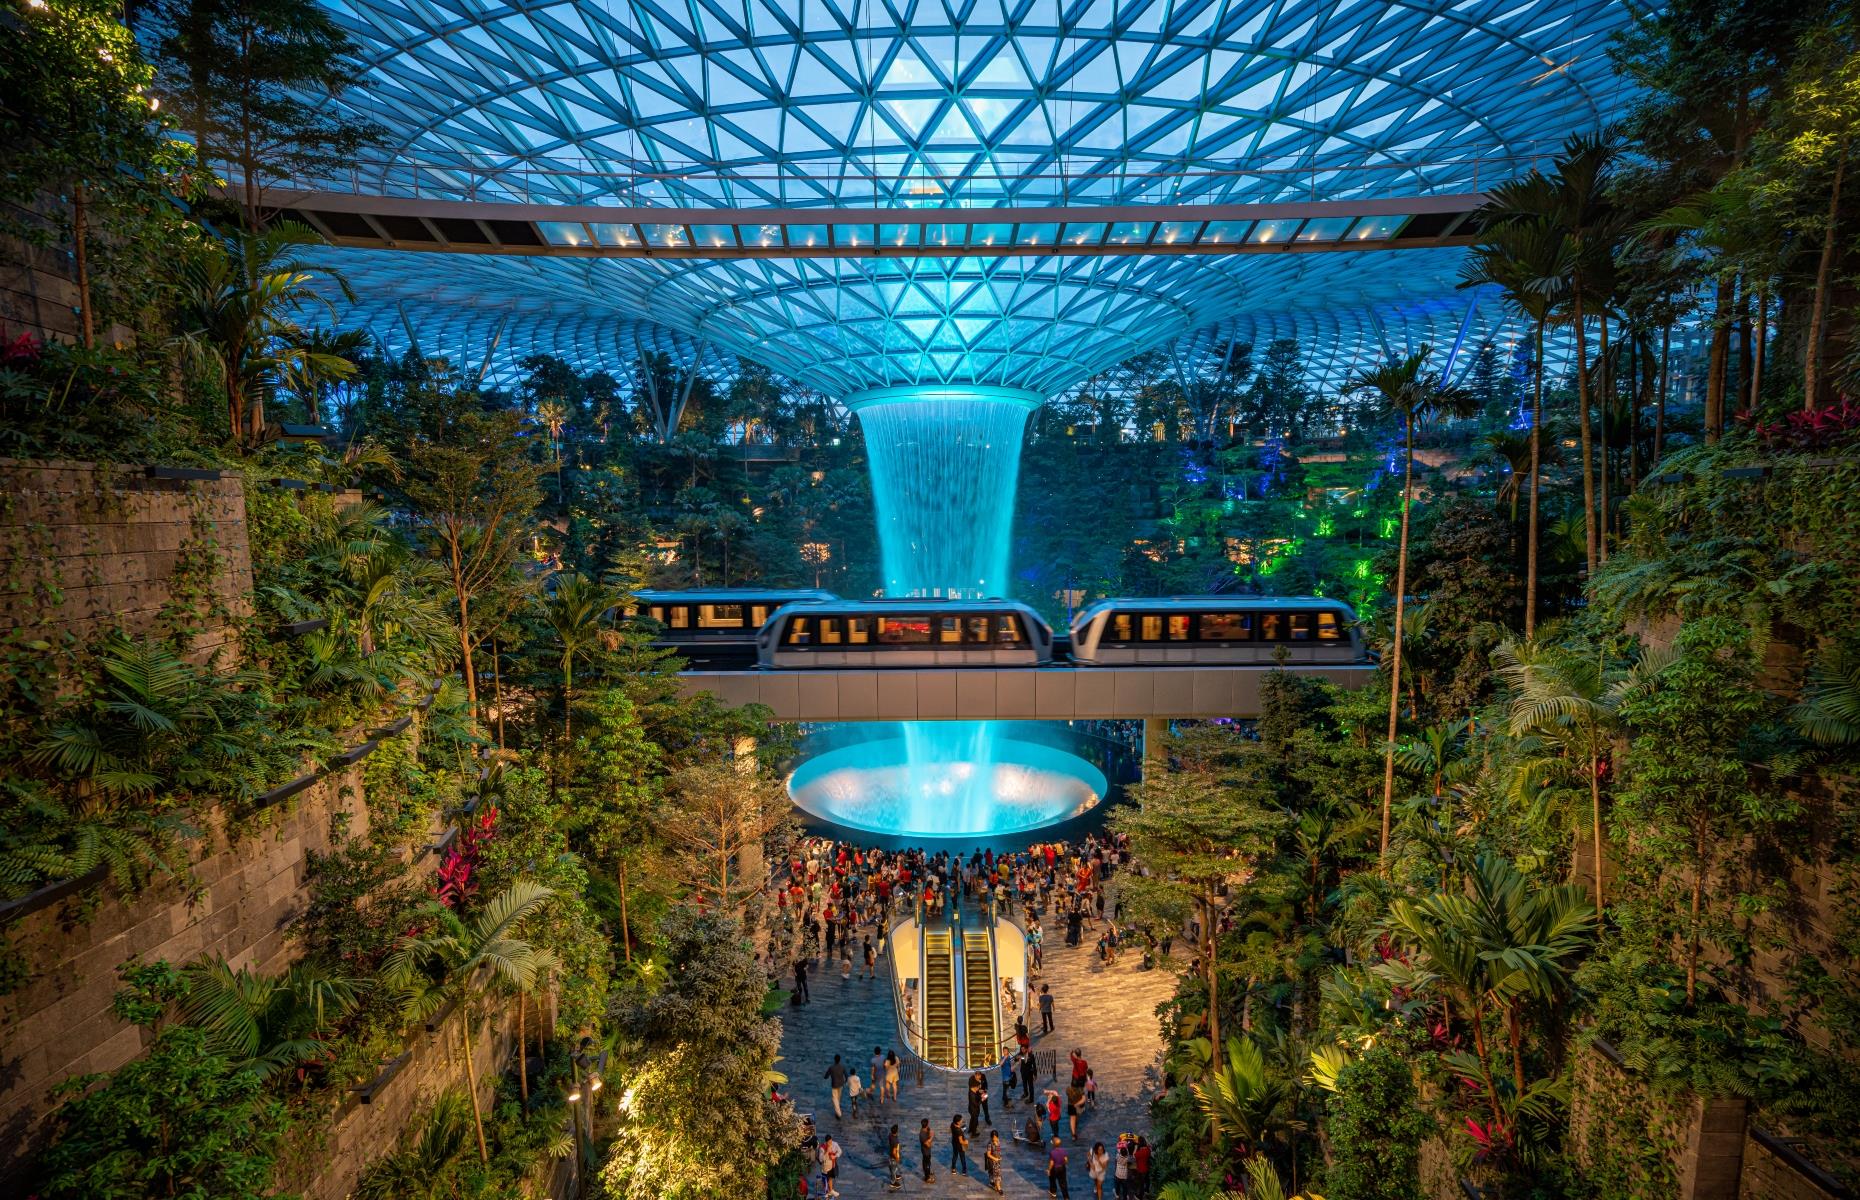 Jewel, which opened in 2019, is a complex home to a forest and the world’s tallest indoor waterfall. It has canopy mazes, foggy clouds and sky nets for clambering through the treetops. The kids will forget they’re even in an airport – it’s a destination in itself.